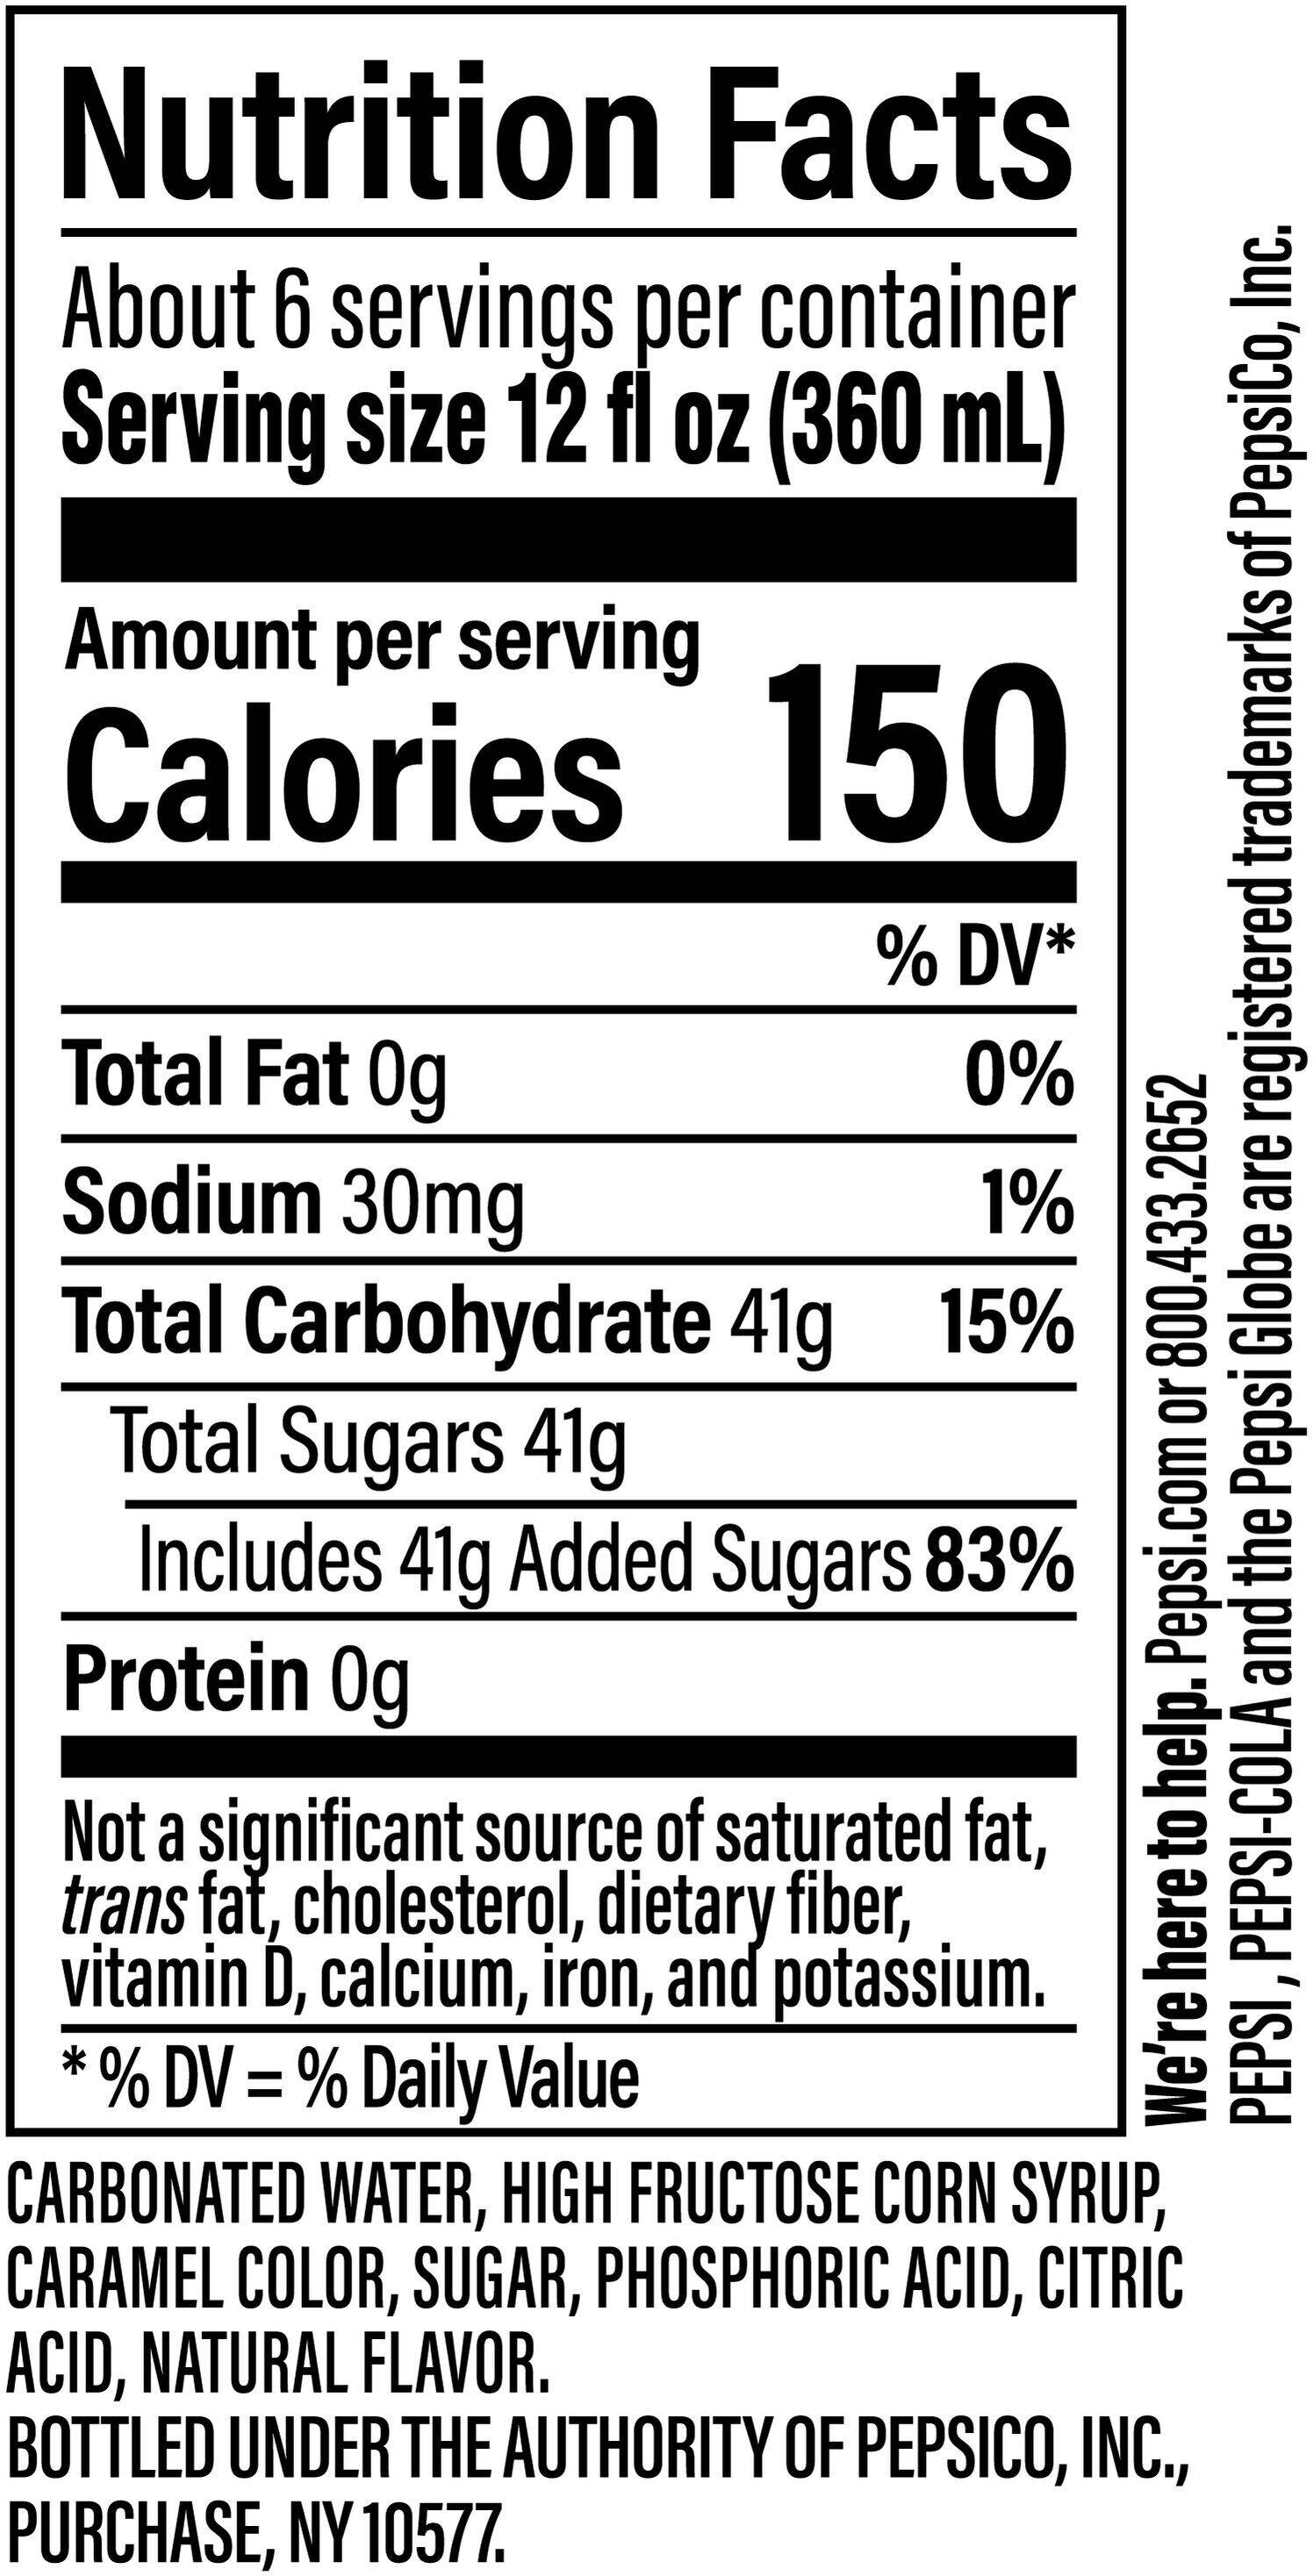 Image describing nutrition information for product Caffeine Free Pepsi